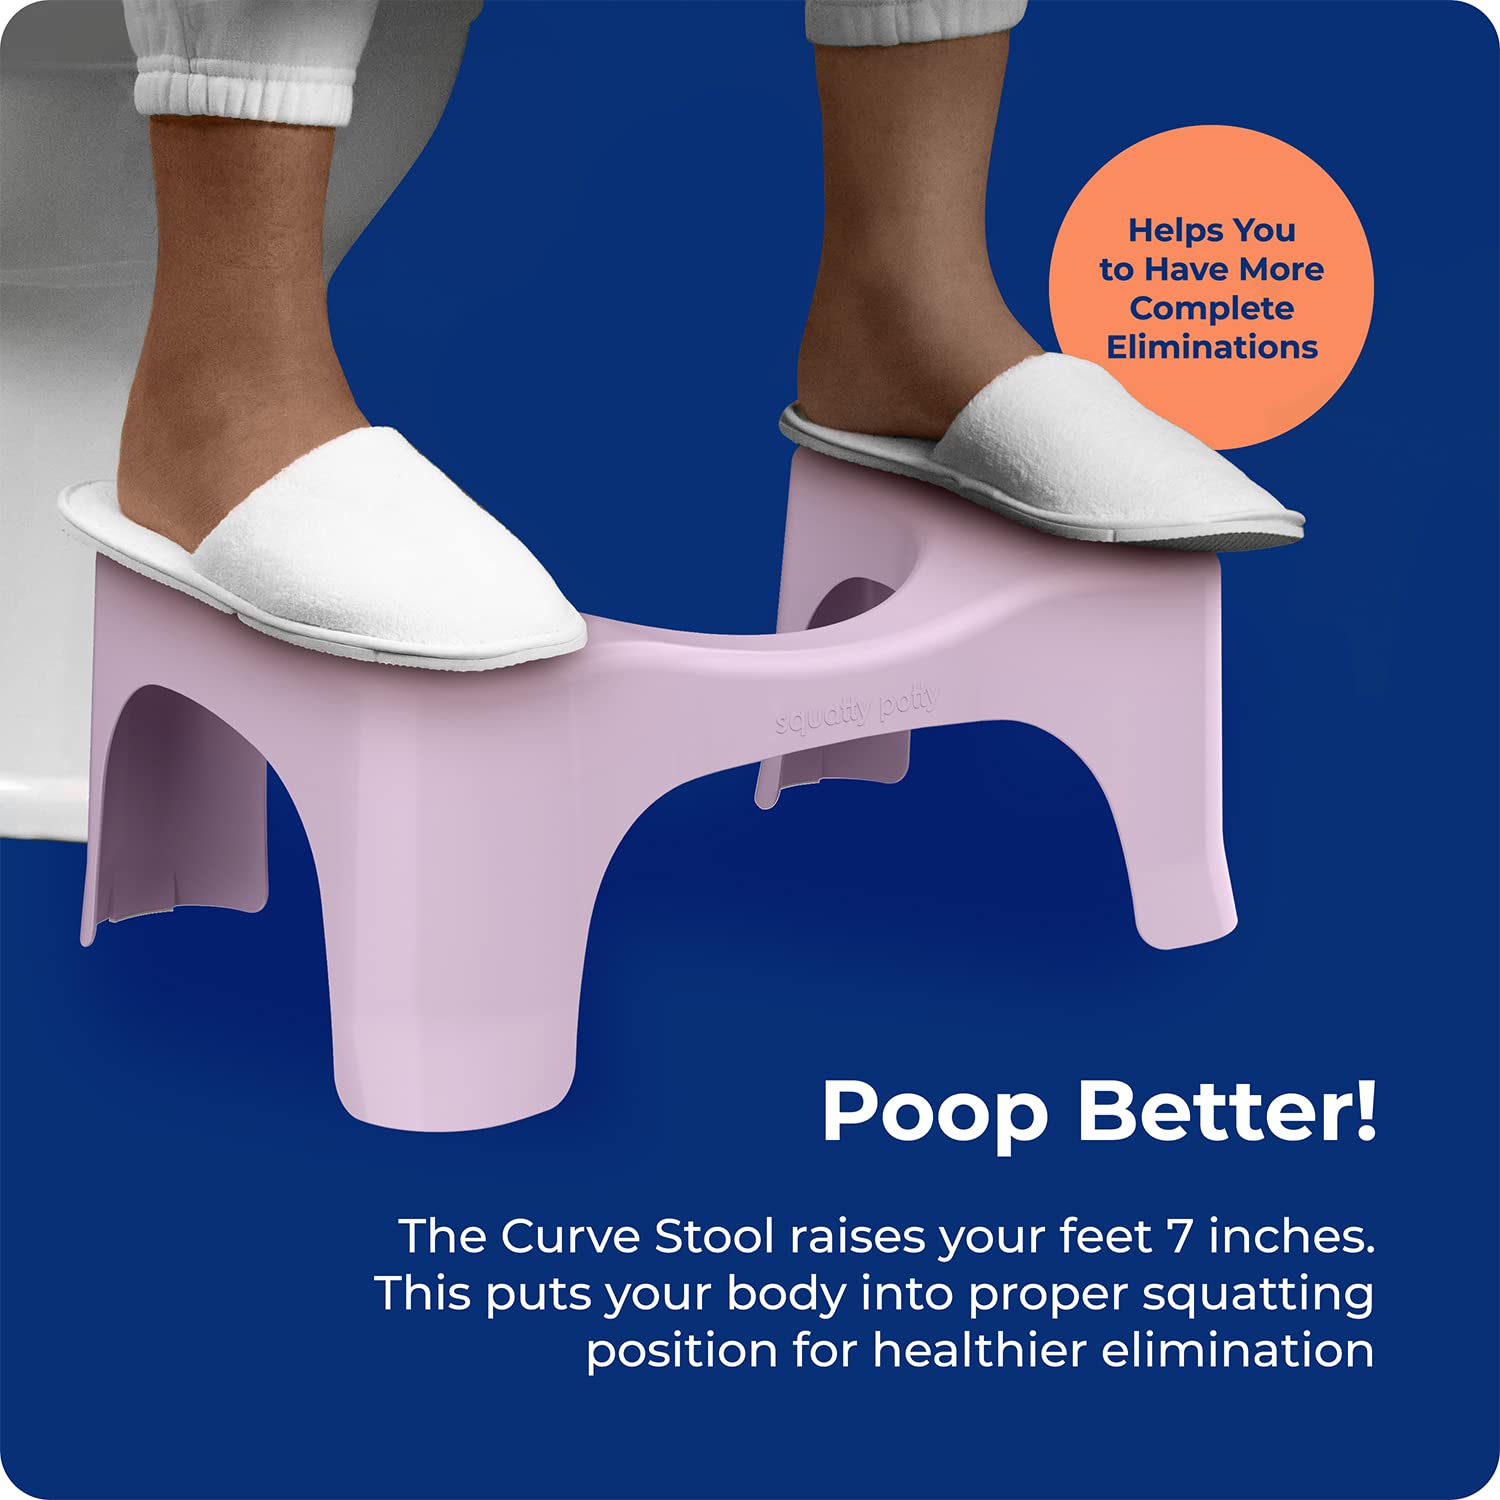 Squatty Potty The Original Bathroom Toilet Stool Curve Lightweight with Sleek and Modern Design, Pink, 7